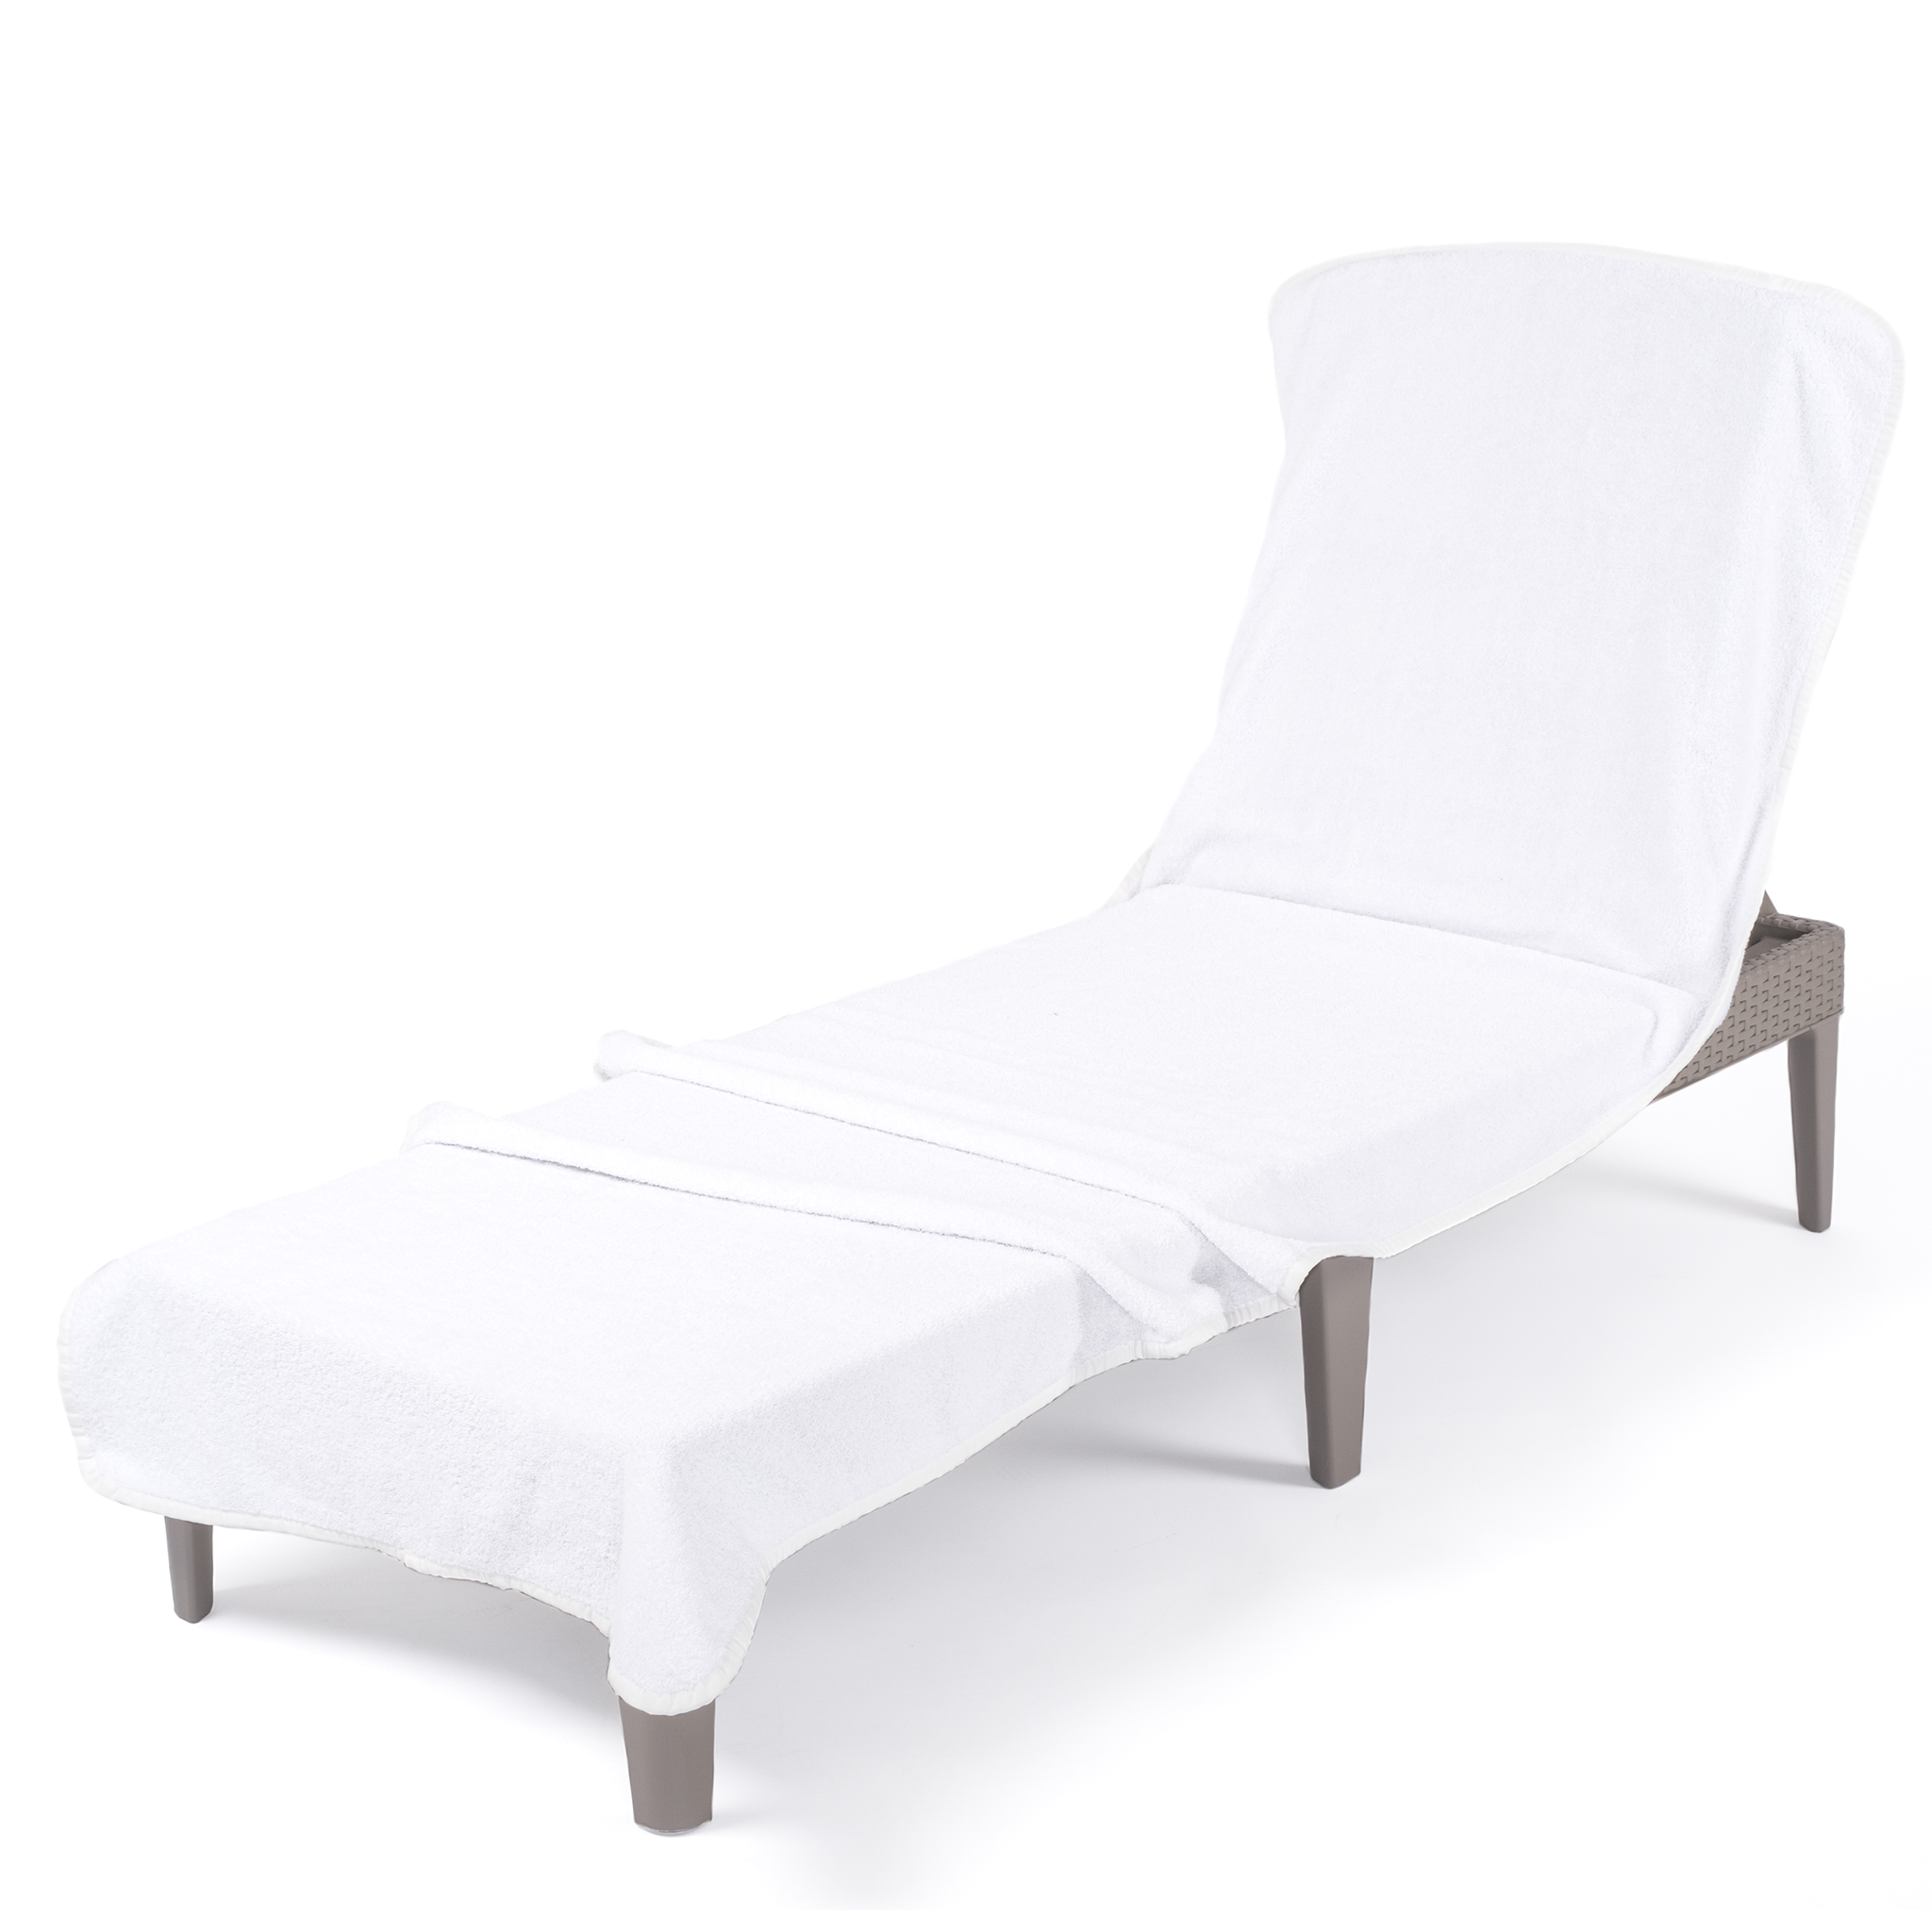 American Soft Linen - Chaise Lounge Covers Towel - 16 Set Case Pack - White - 4